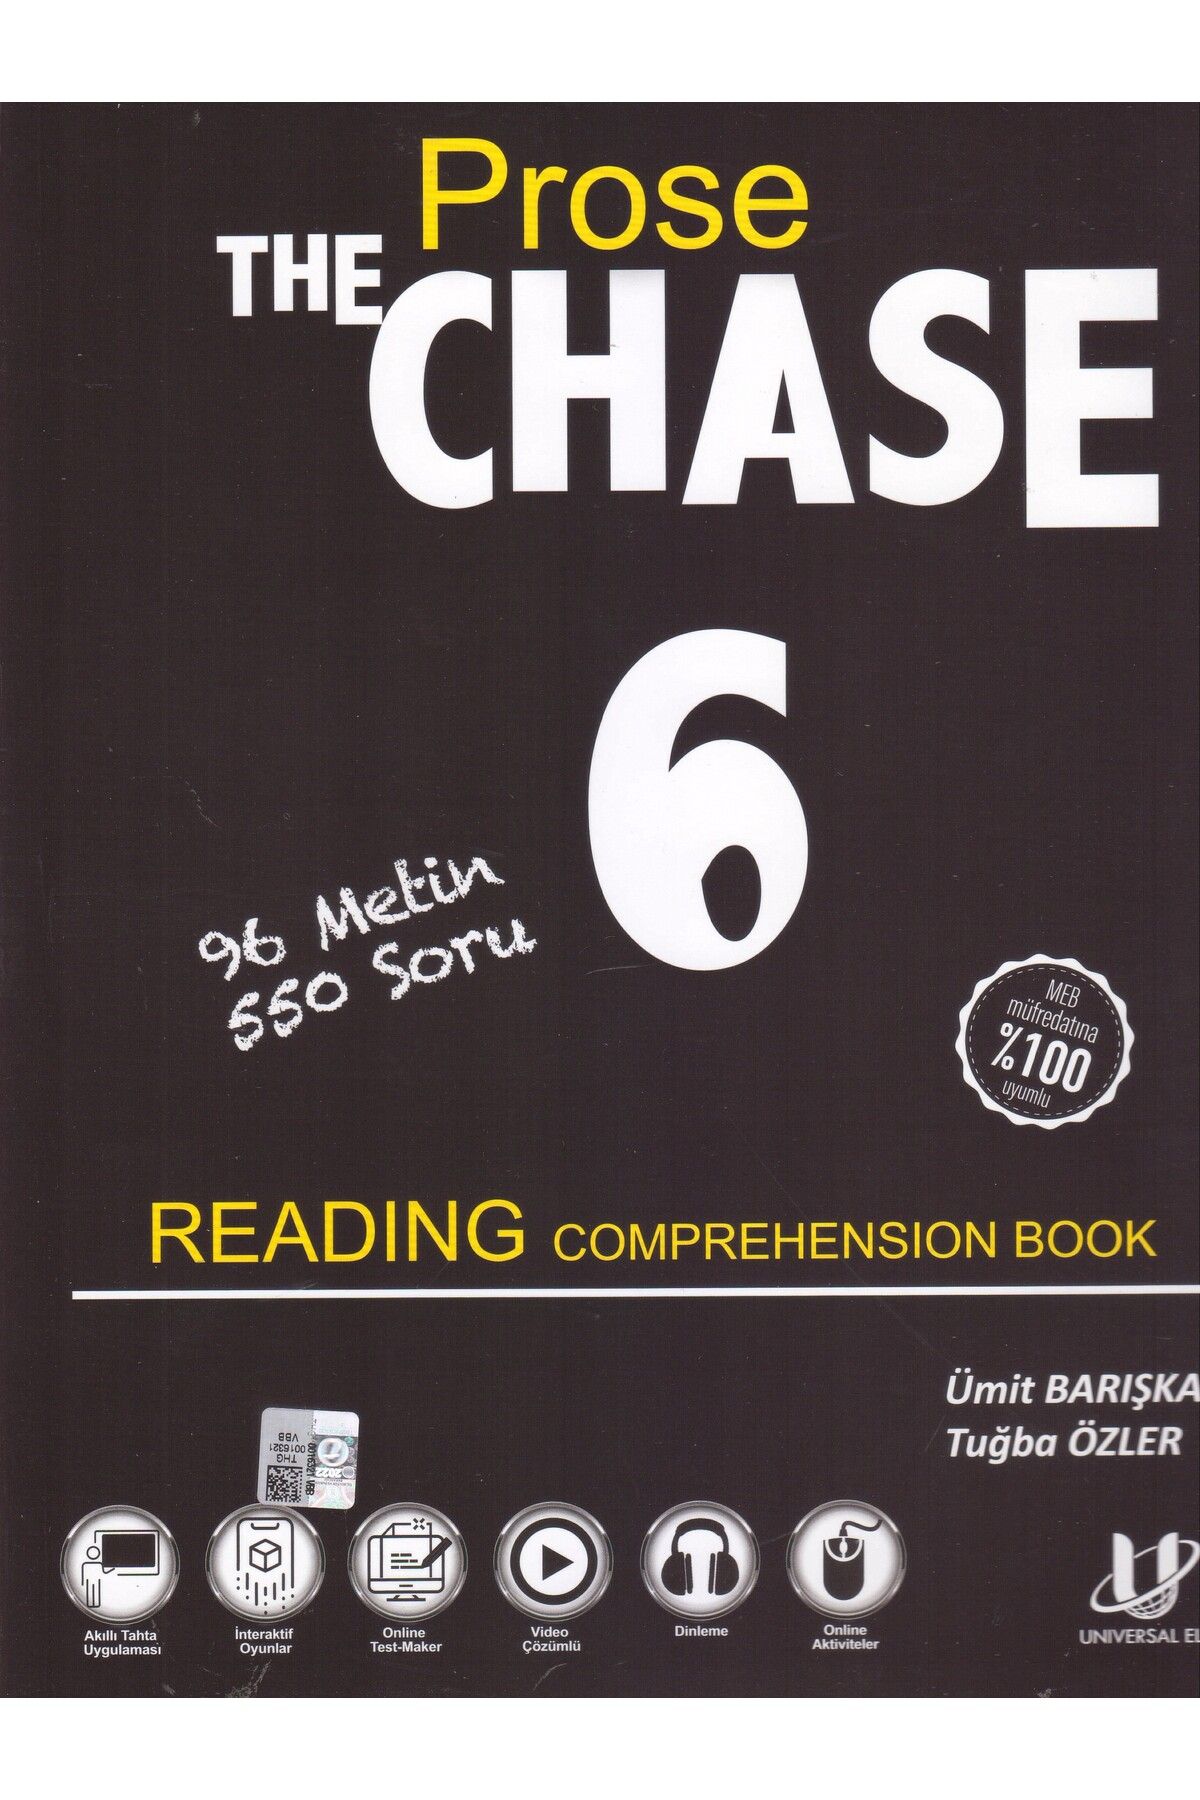 Universal The Chase 6 Prose Reading Comprehension Book